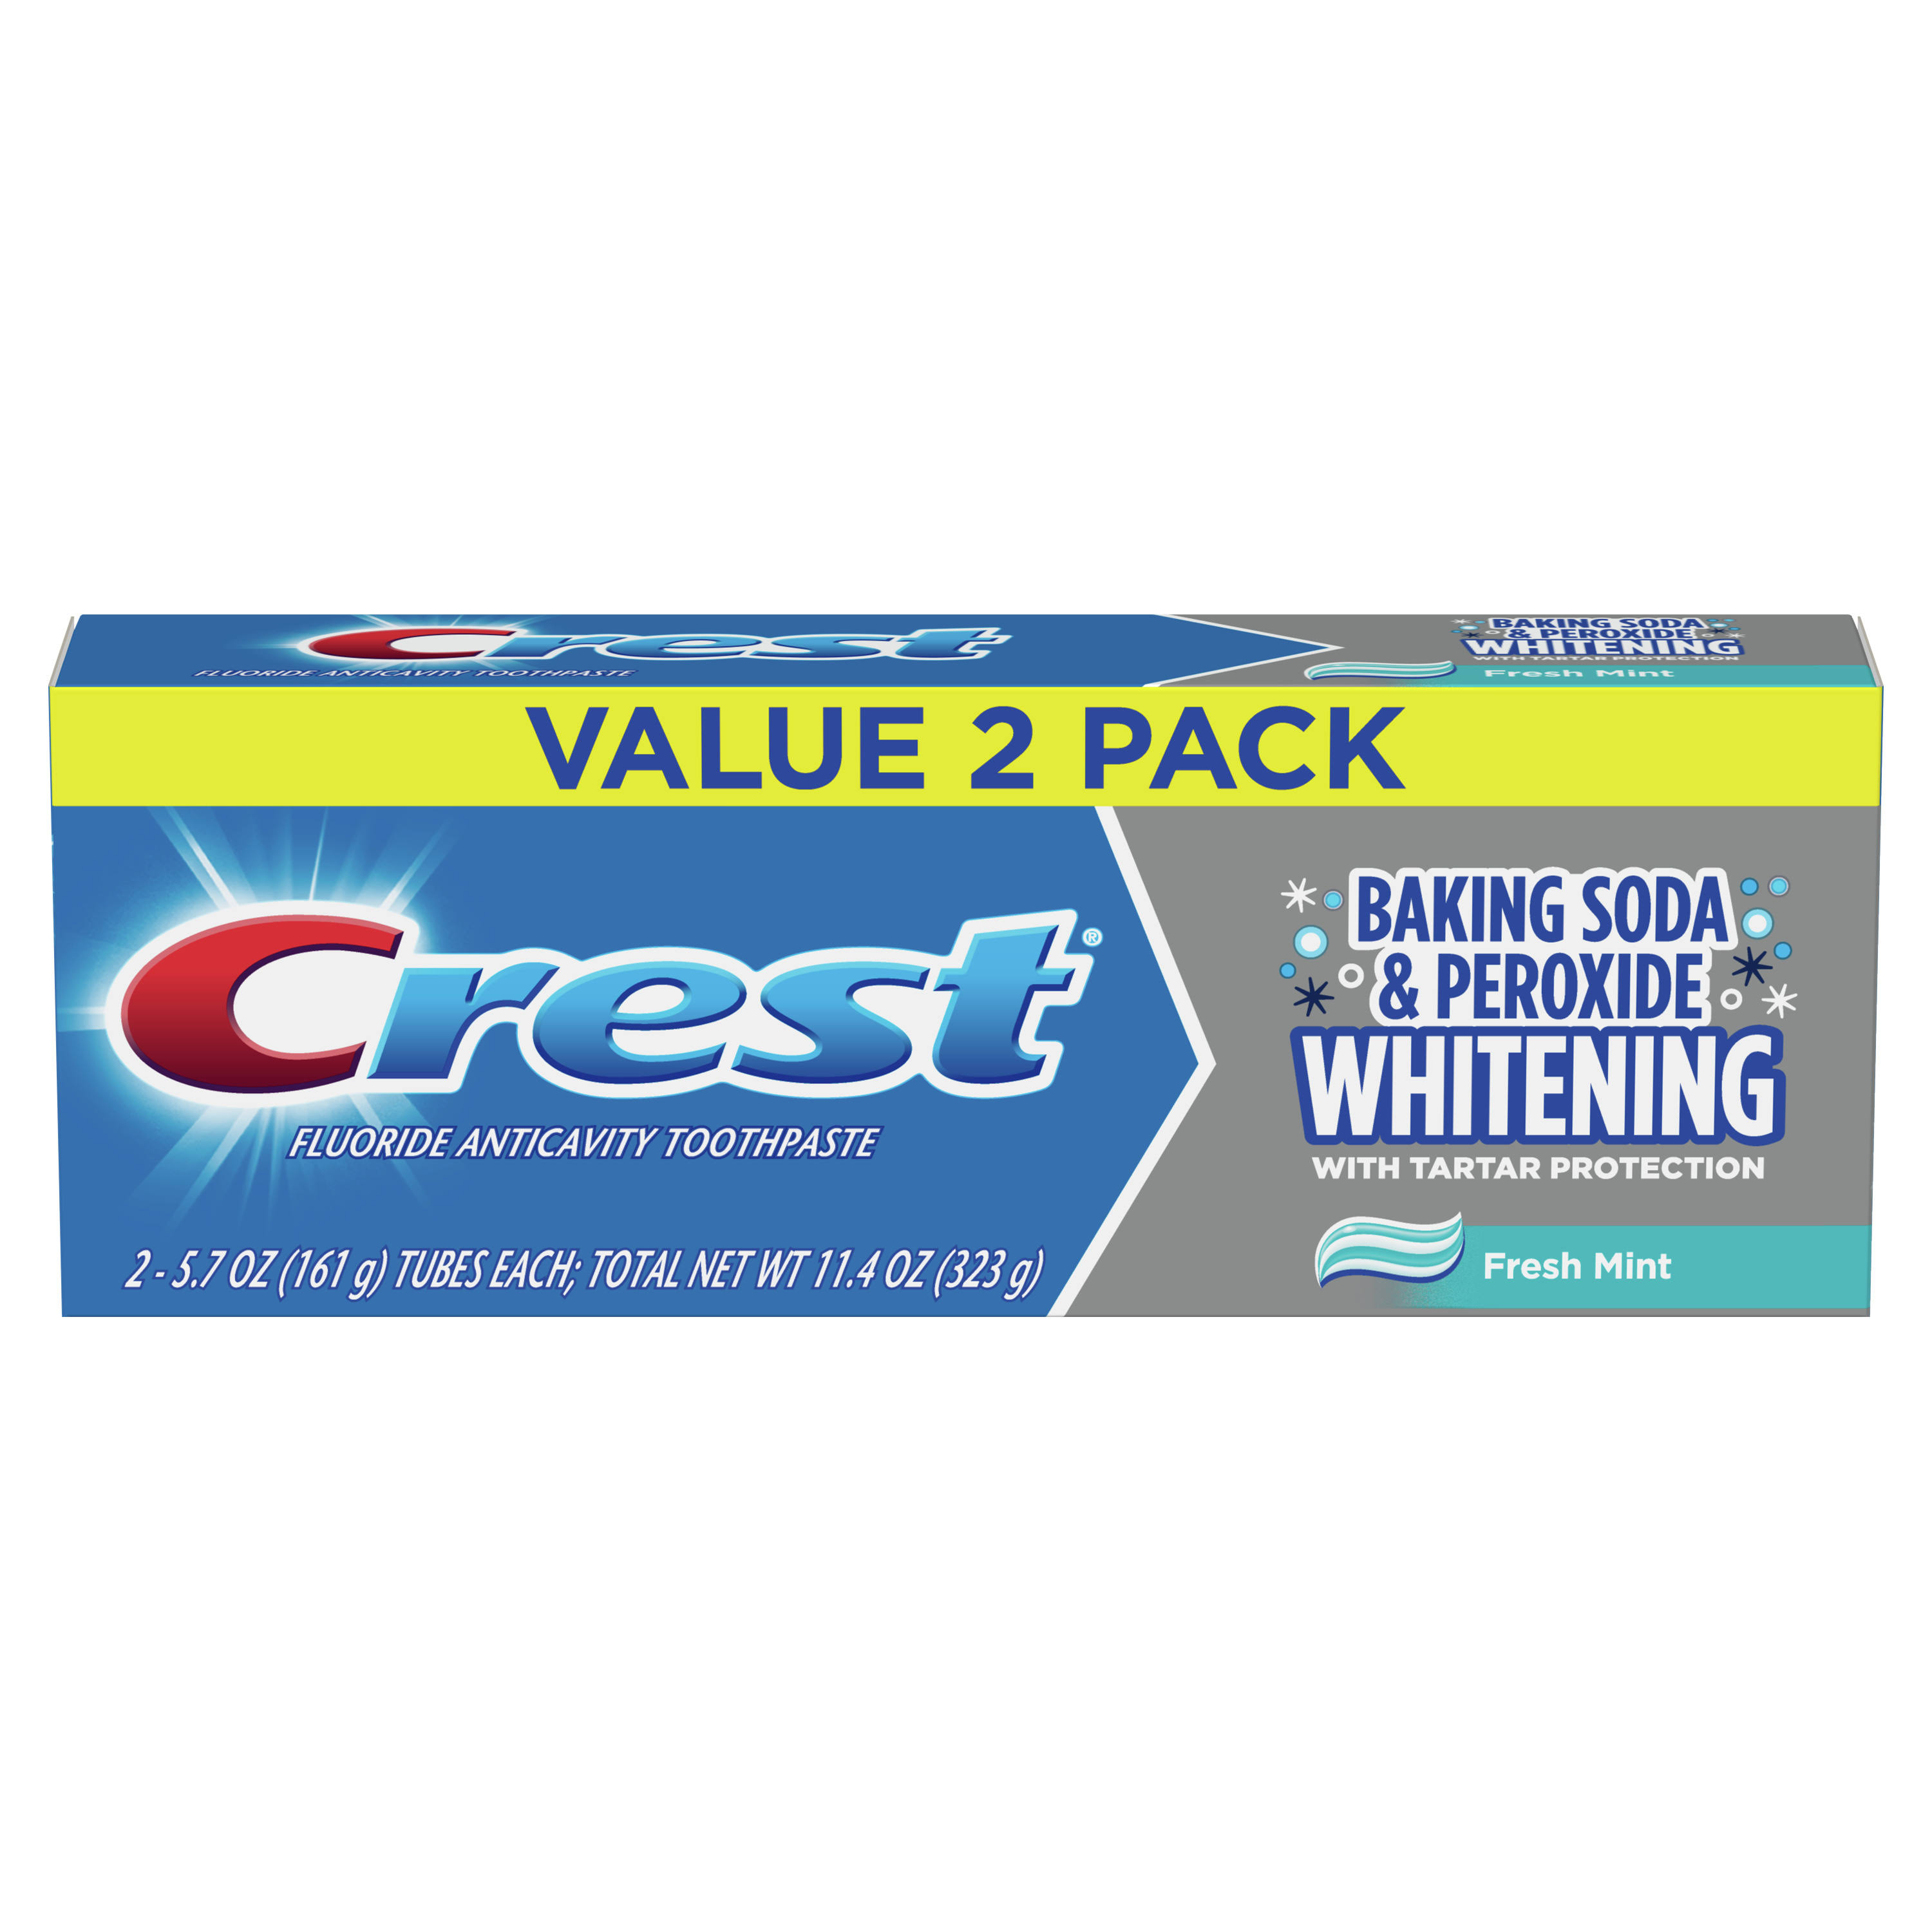 Crest Baking Soda & Peroxide Fresh Mint Toothpaste, 5.7 oz (2 Pack)